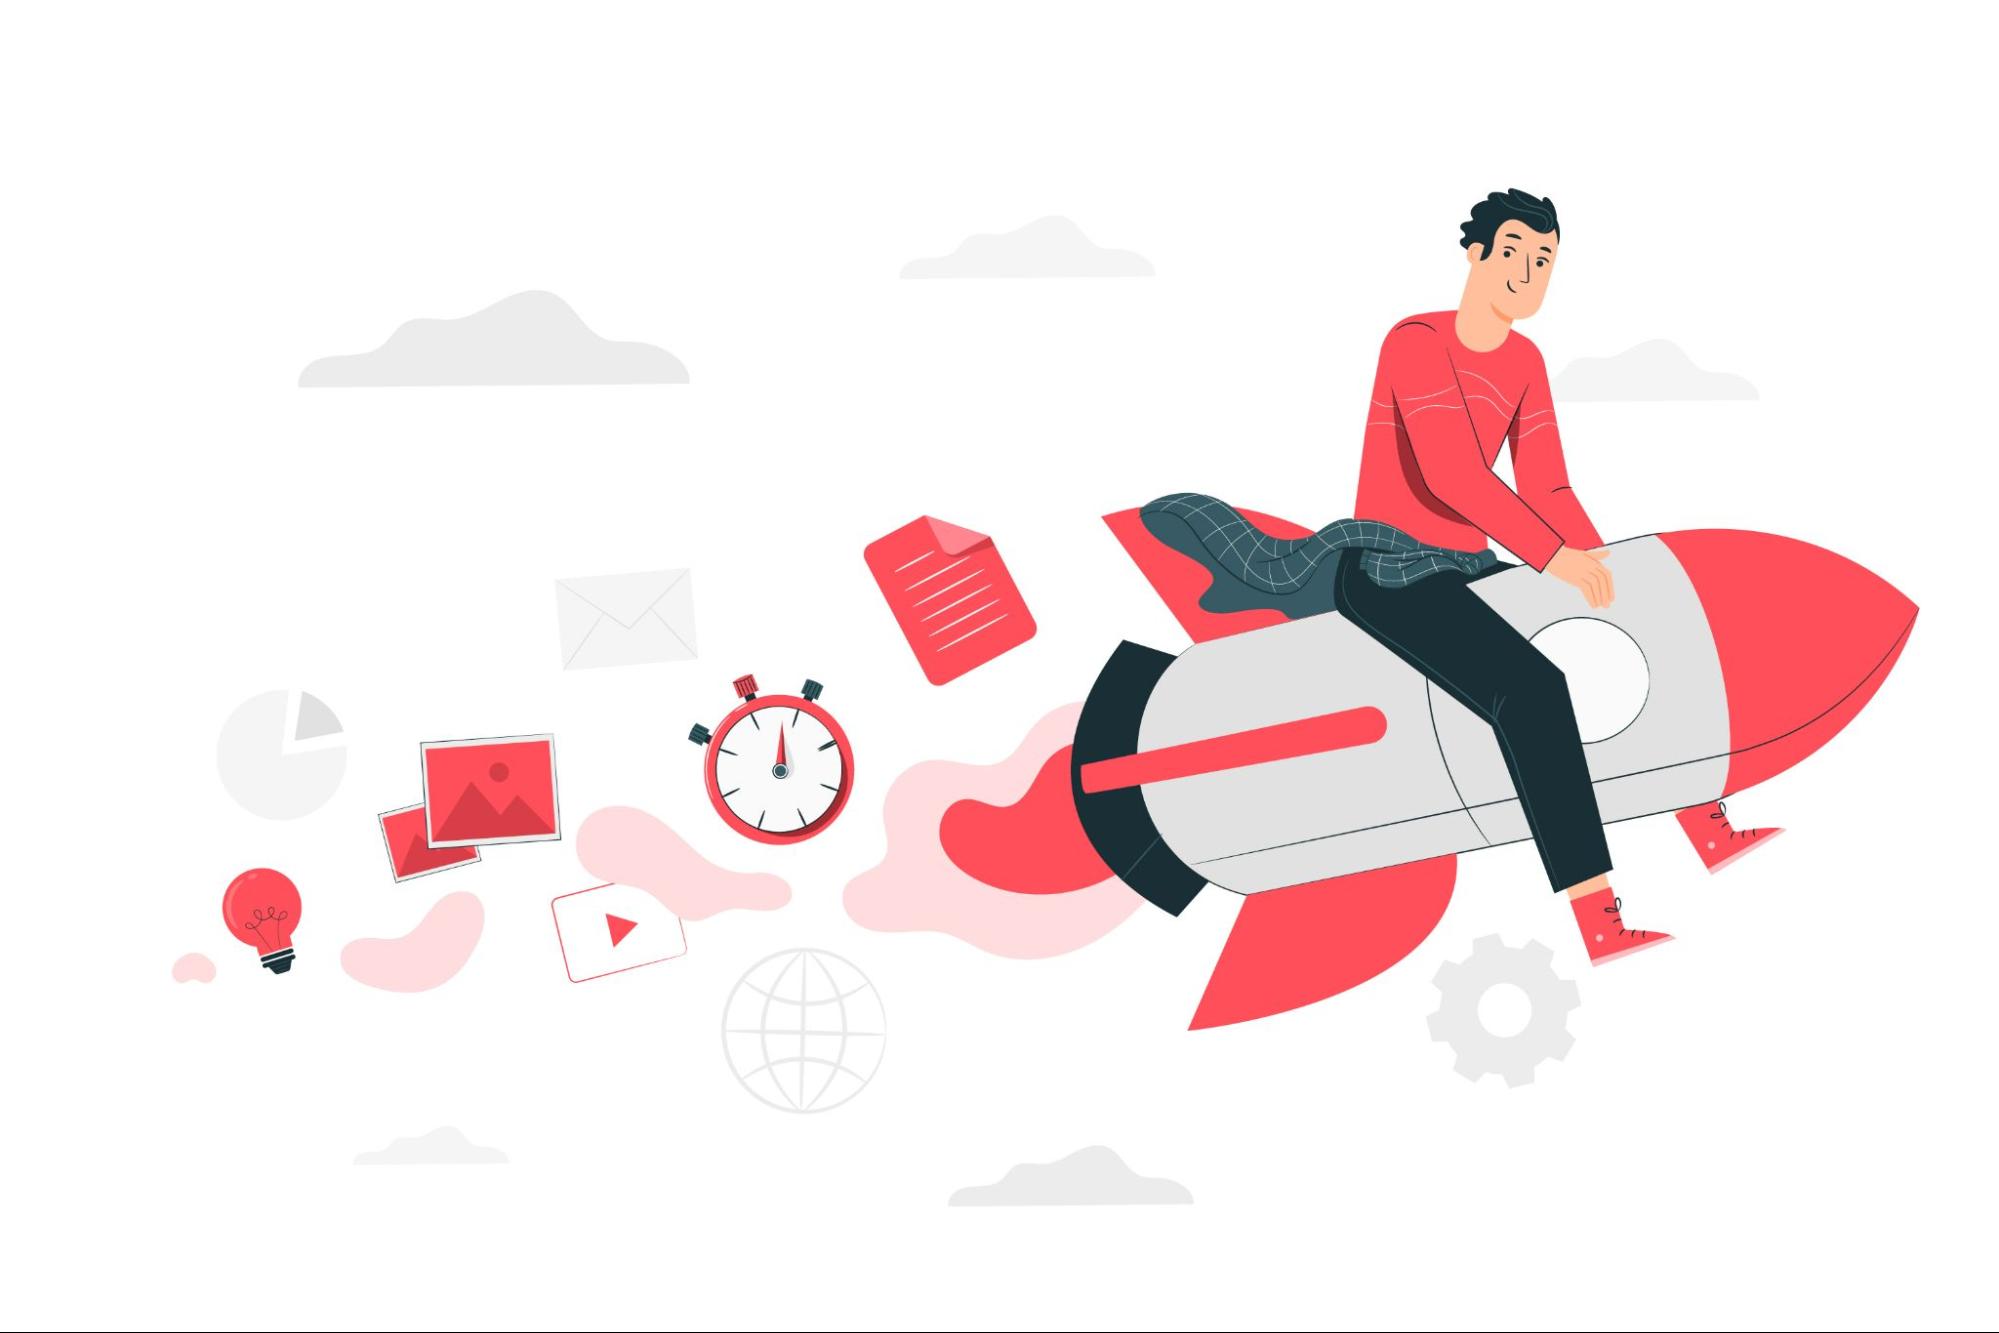 The image shows a Man sitting on a rocket with icons, symbolizing success and innovation. 